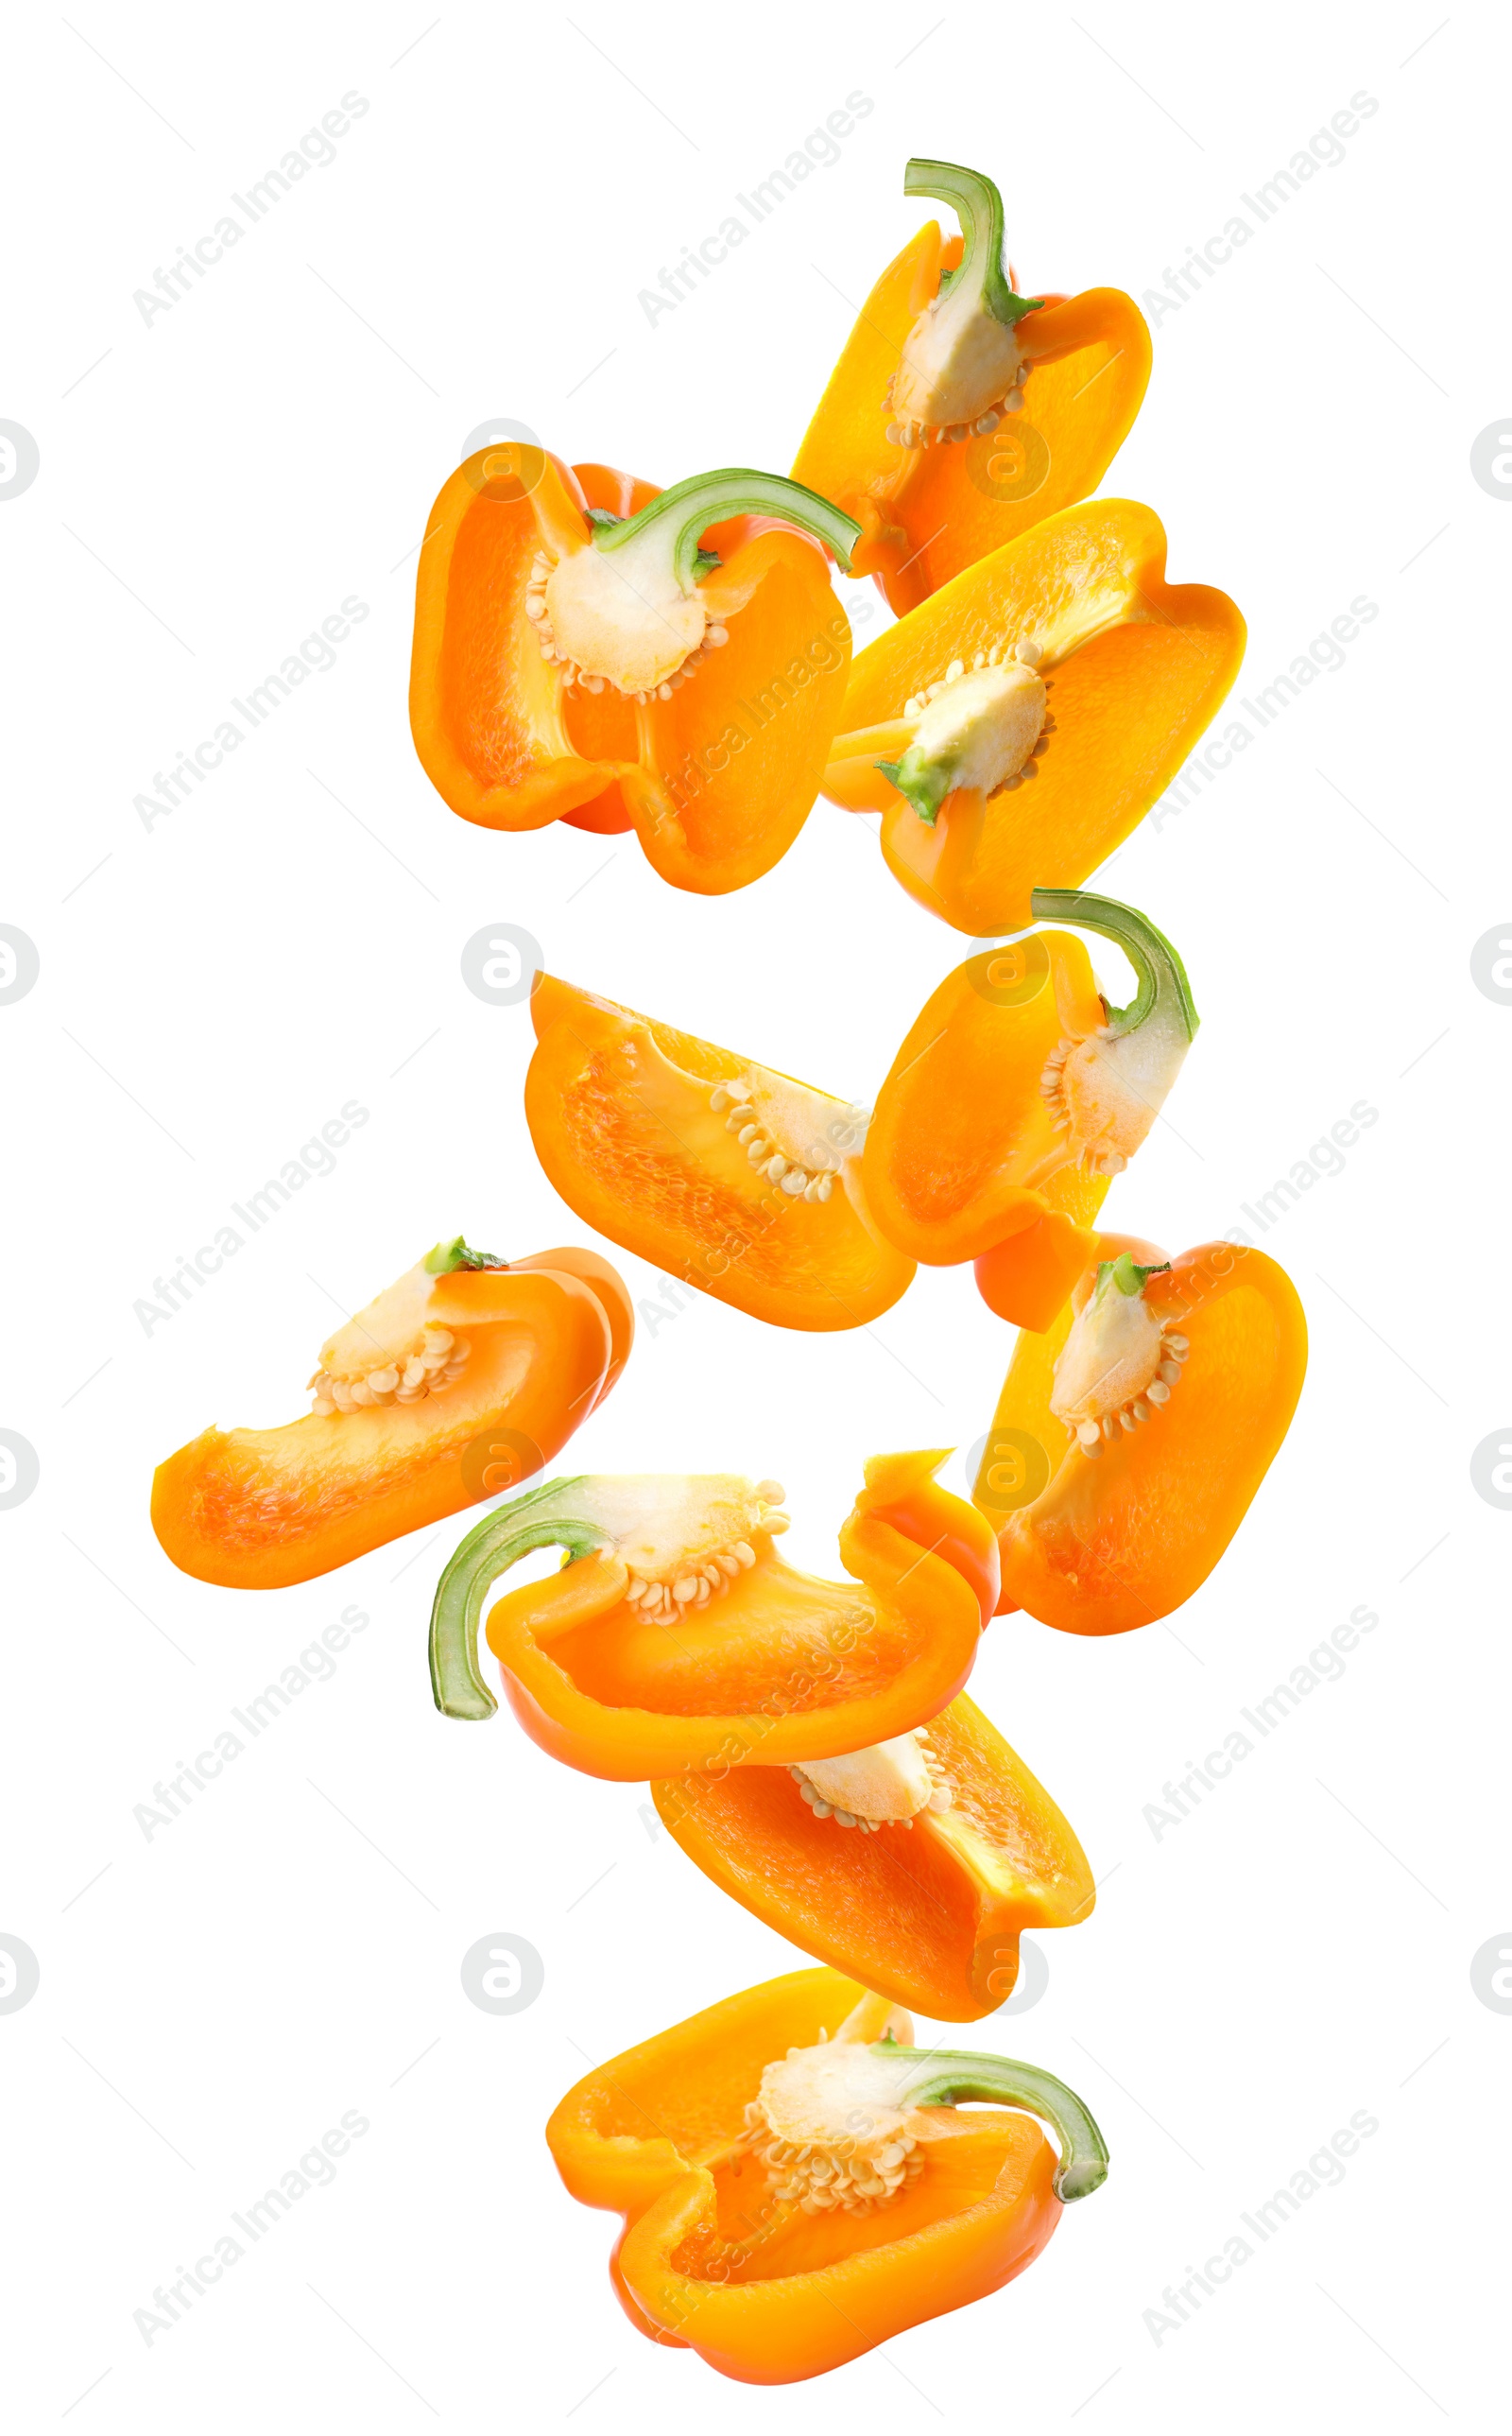 Image of Falling cut ripe orange bell peppers on white background